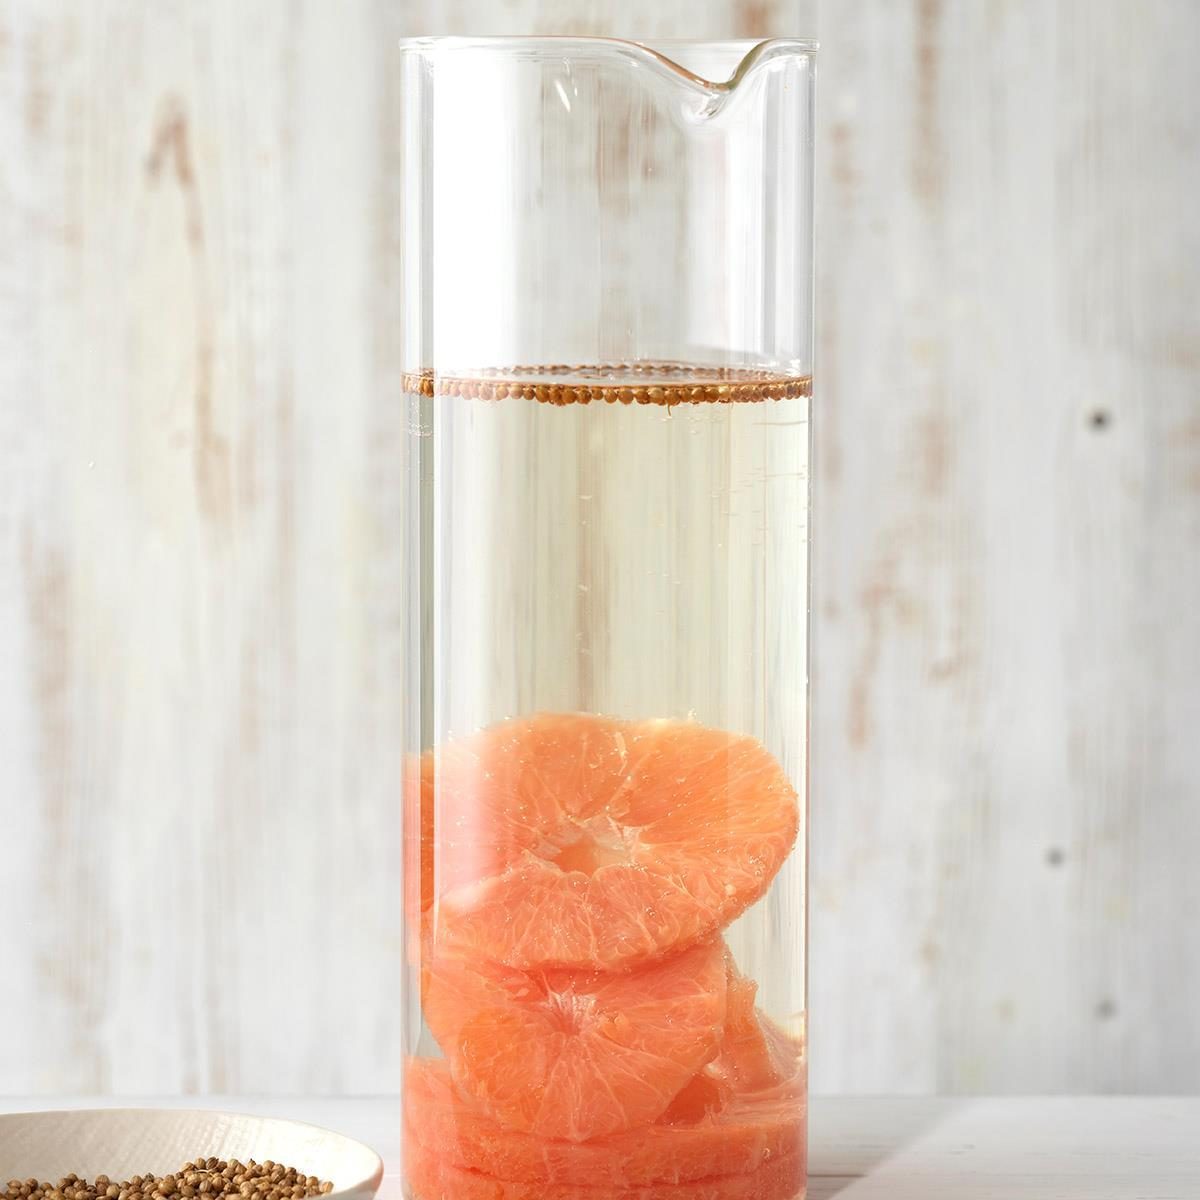 https://www.tasteofhome.com/wp-content/uploads/2018/12/Grapefruit-and-Coriander-Infused-Water_EXPS_THFM19_233668_C09_27_6b-1.jpg